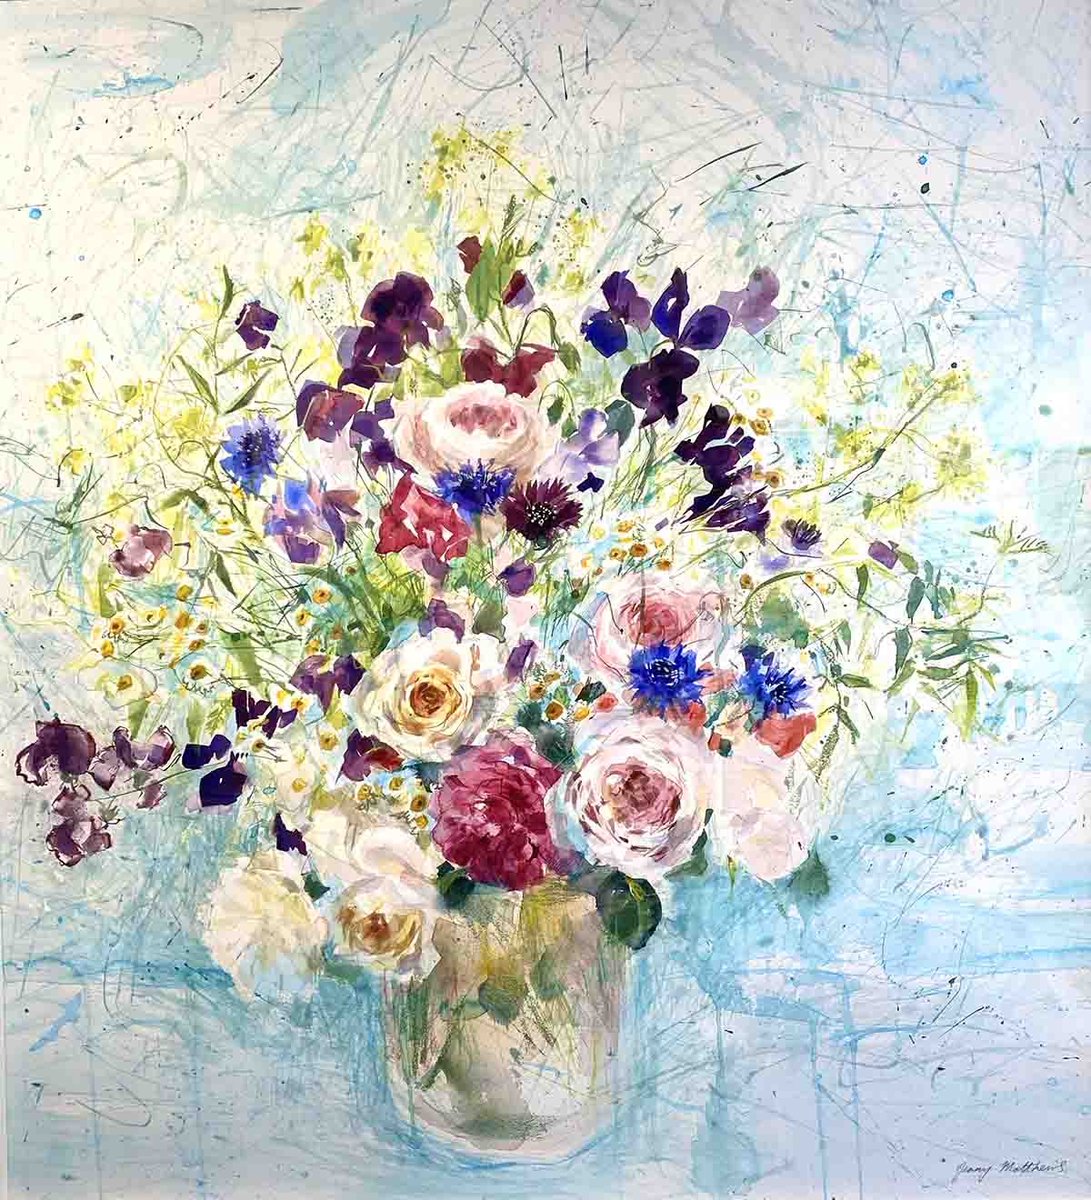 @sprosongallery in St Andrews continues its exhibition programme of new contemporary work, featuring the accomplished floral compositions of Jenny Matthews RSW.
artmag.co.uk/jenny-matthews…
#artmag #scottishart #scottishgalleries #scottishartonline #scottishpainting